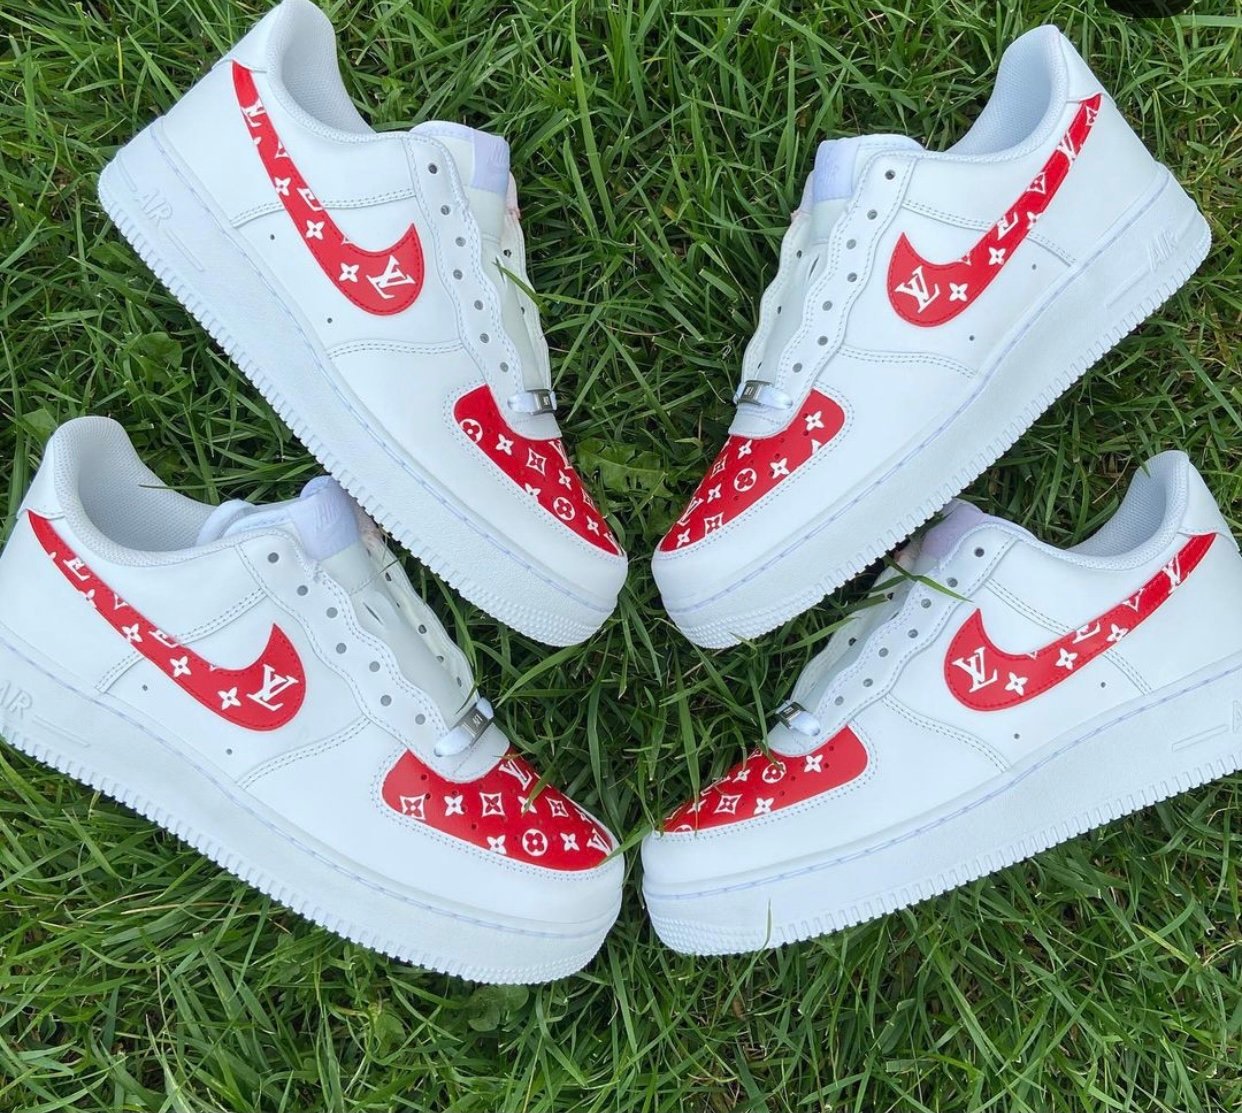 red lv air forces